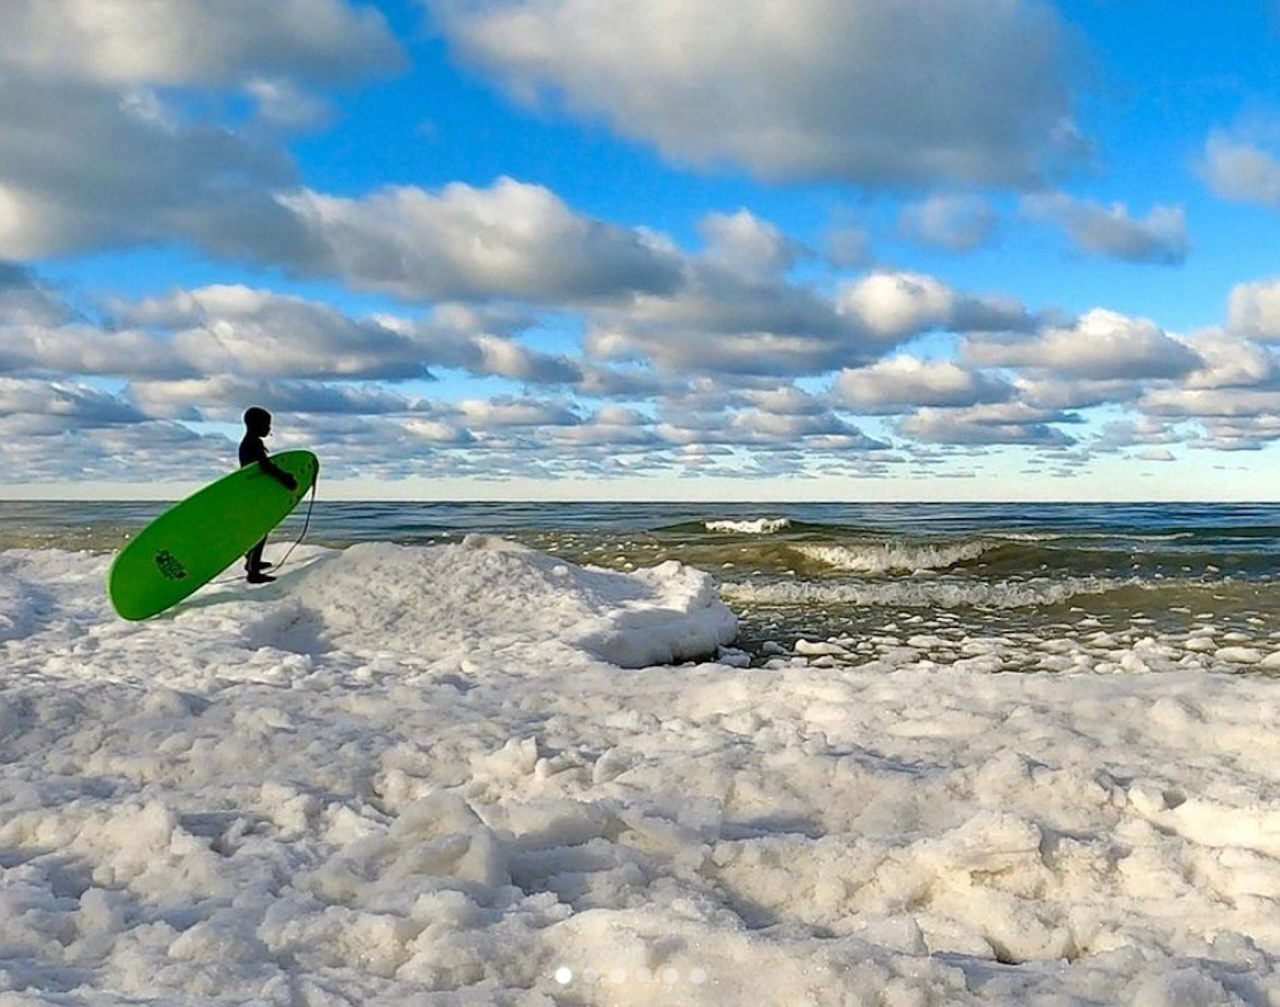 Eleven-year-old Jameson Walter contemplates a winter surf session on Lake Michigan, where he has been catching waves since the age of six.